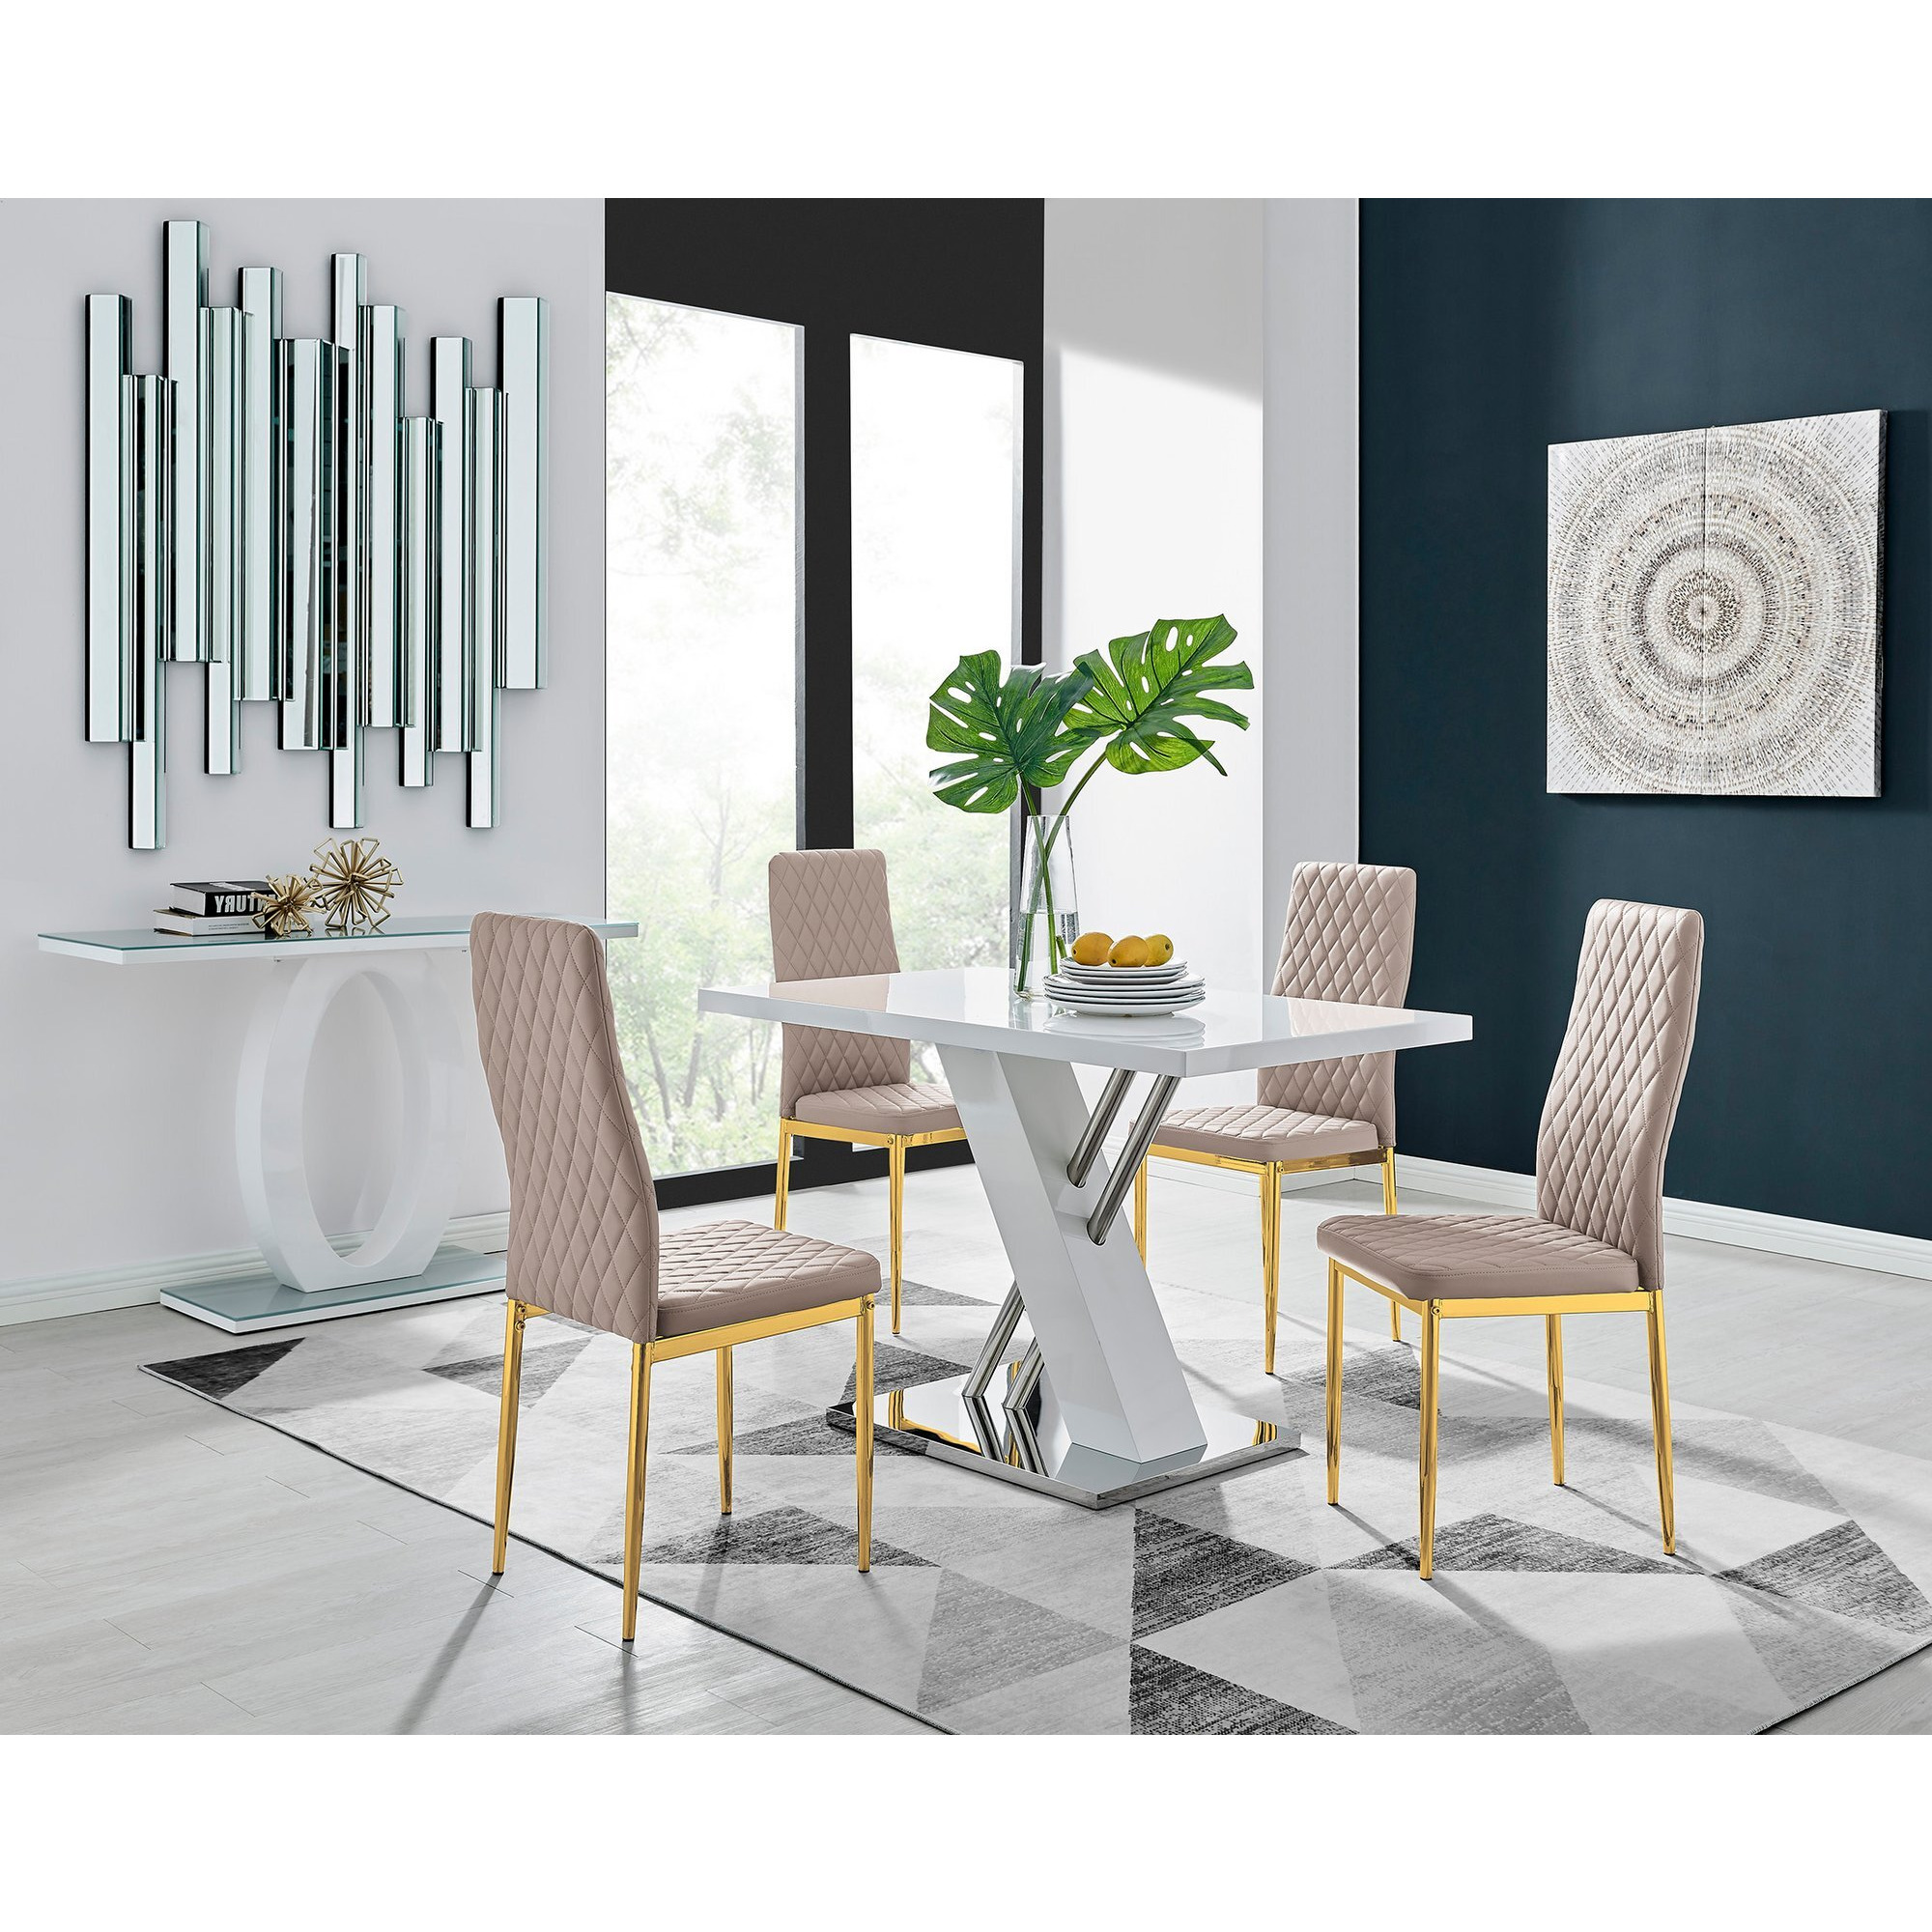 Sorrento 4 White Dining Table and 4 Gold Leg Milan Chairs